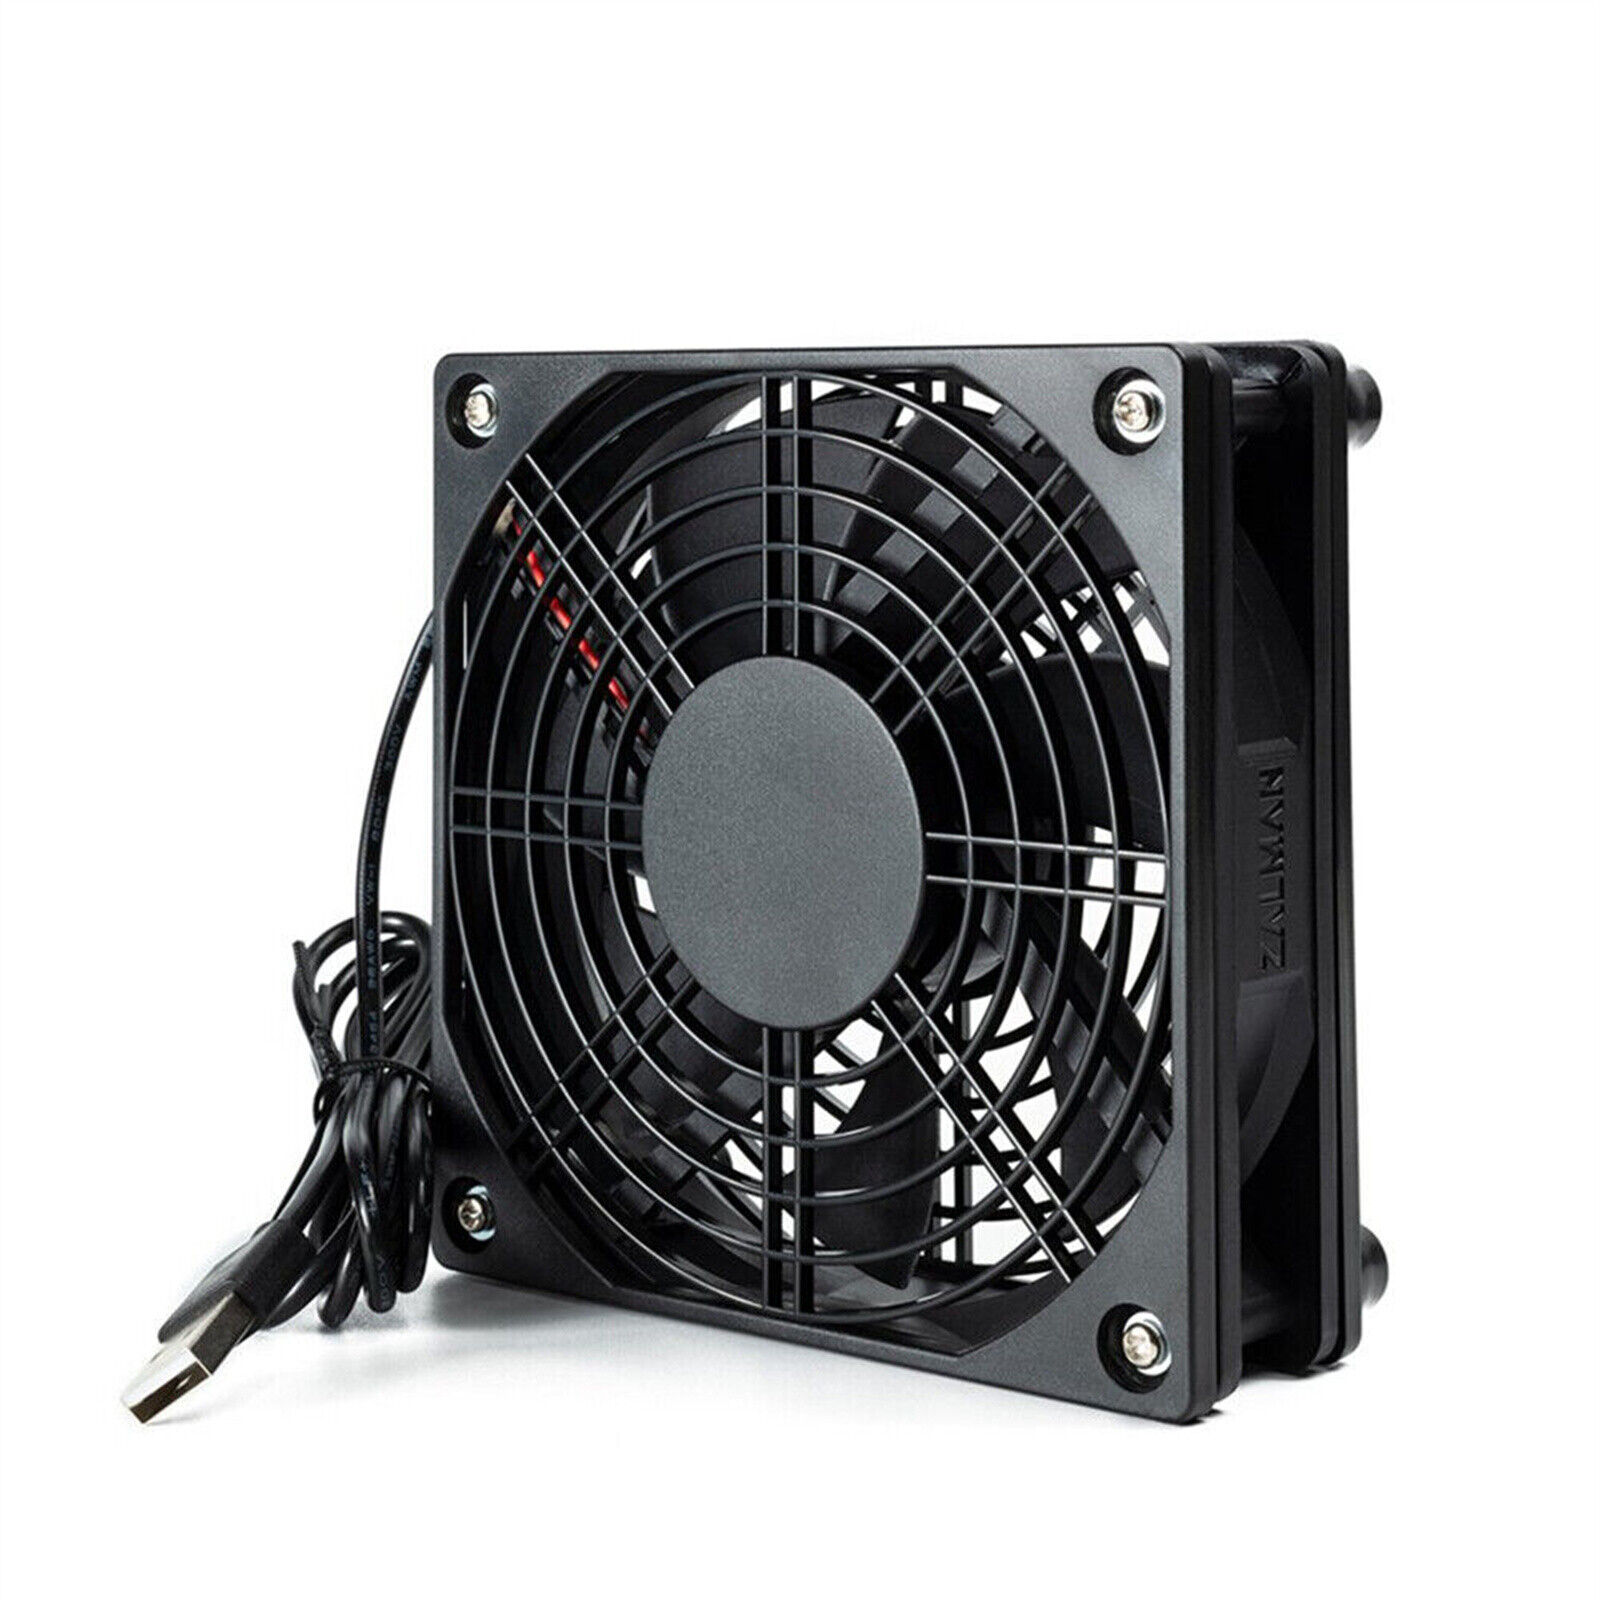 Quiet Dual 120mm USB Cooling Fan, MULTIFAN S7, for Receiver, DVR, and Computer